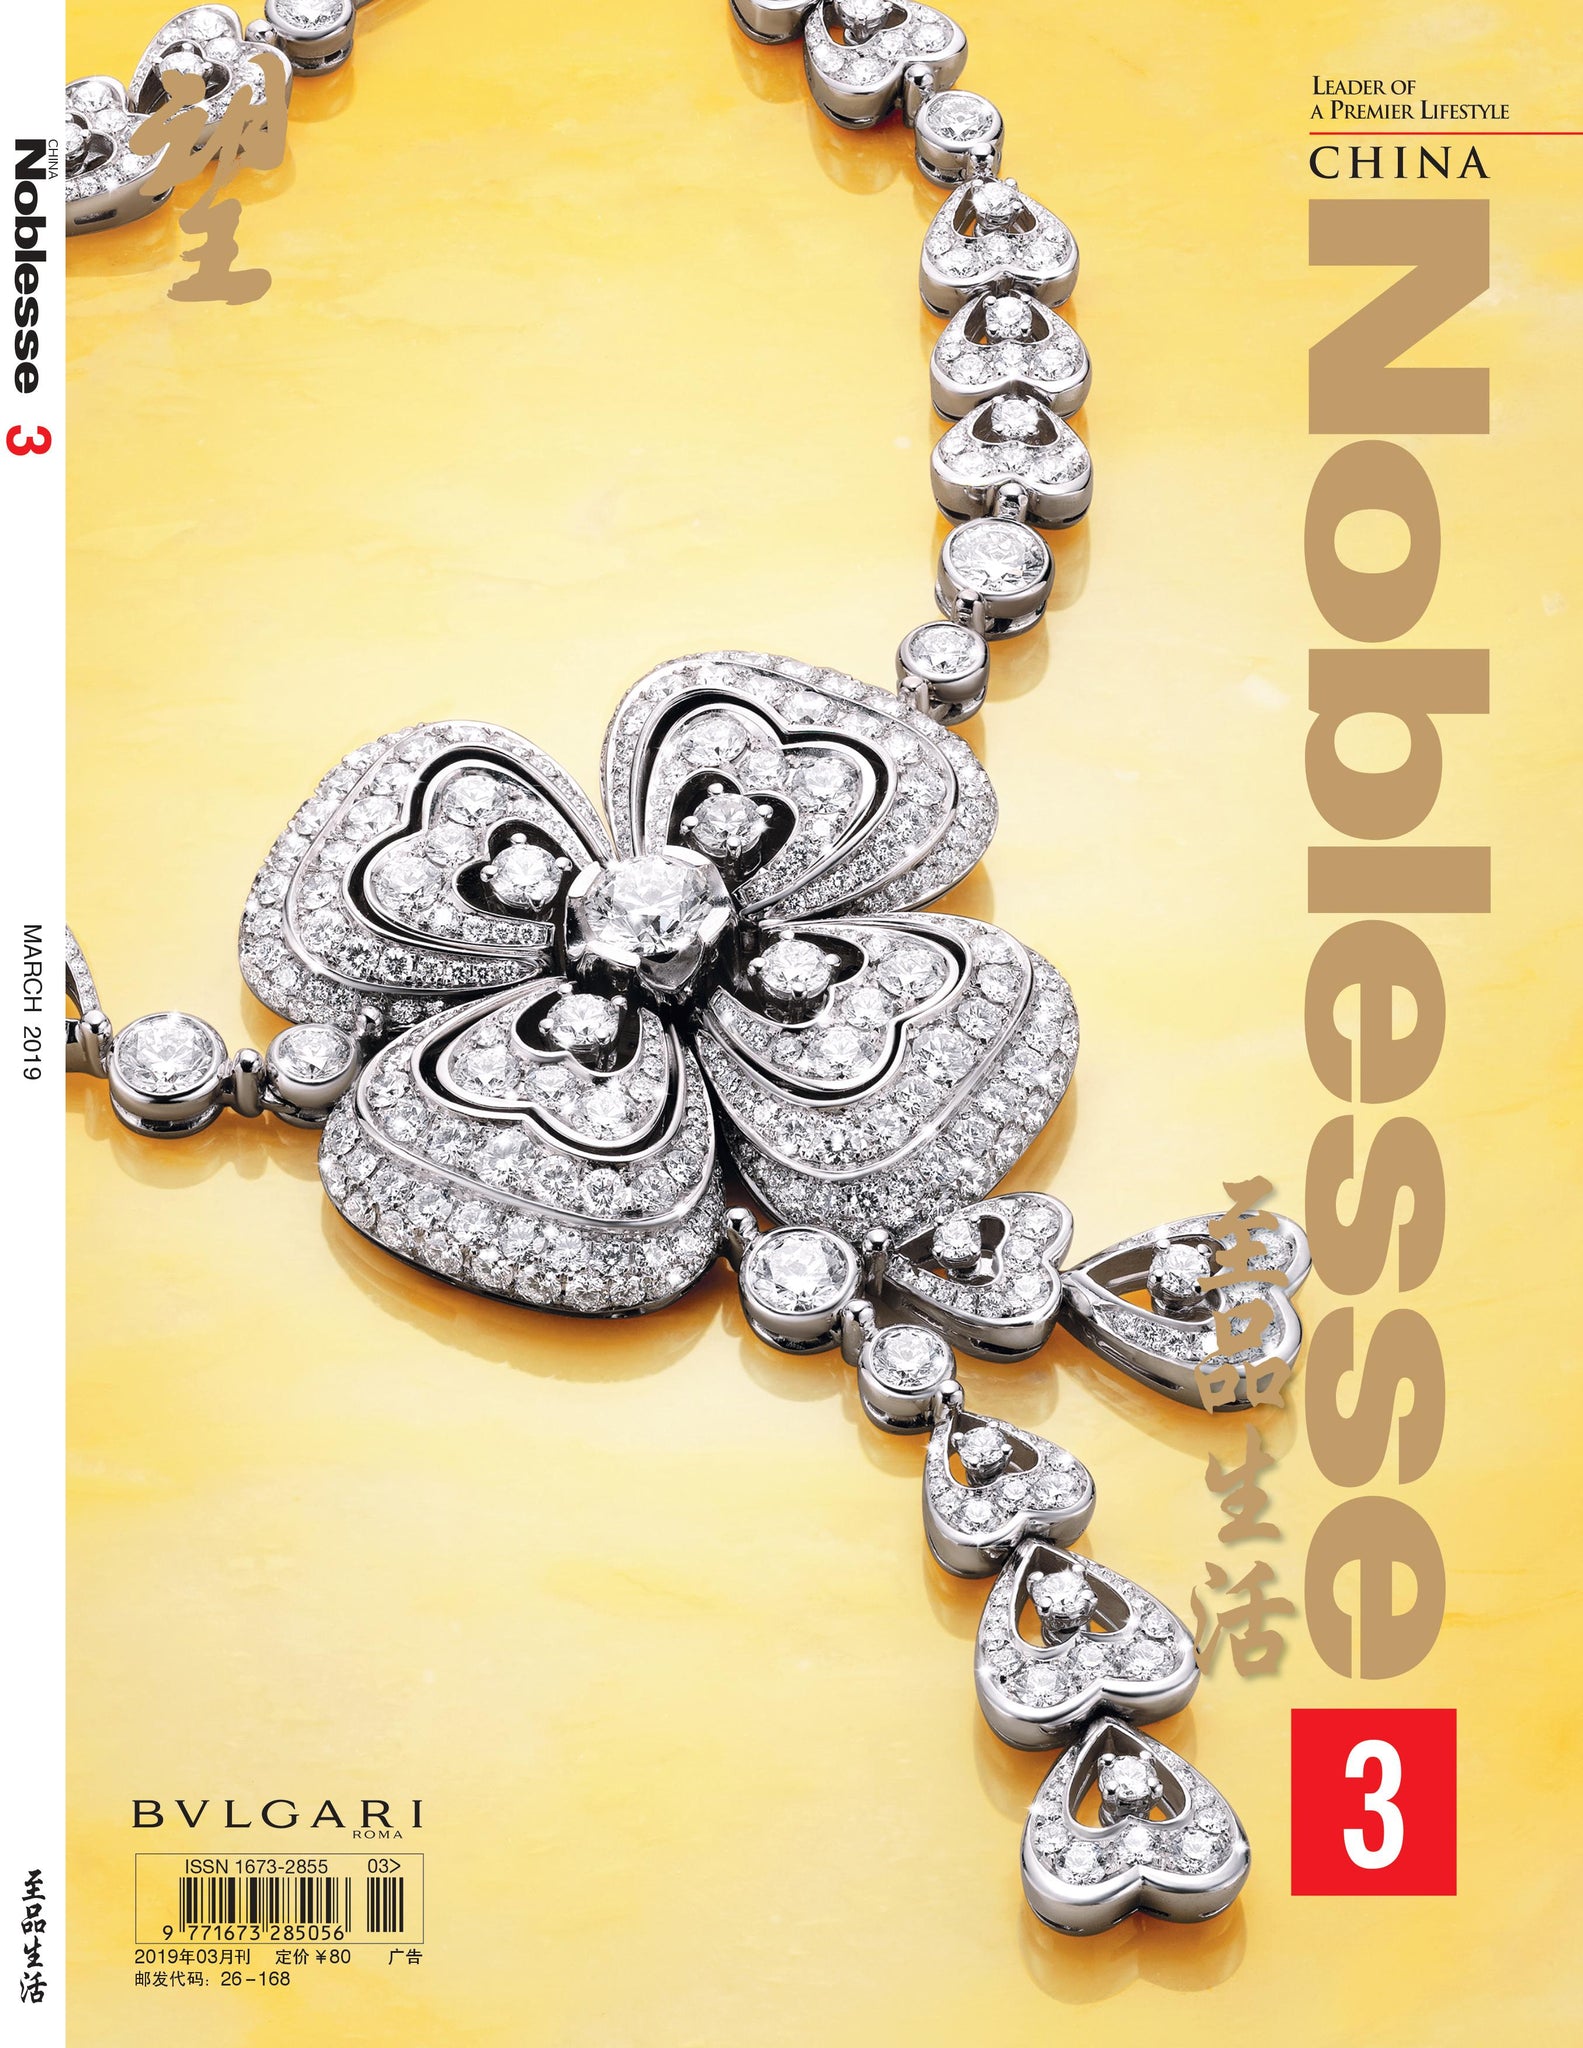 Noblesse, March 2019